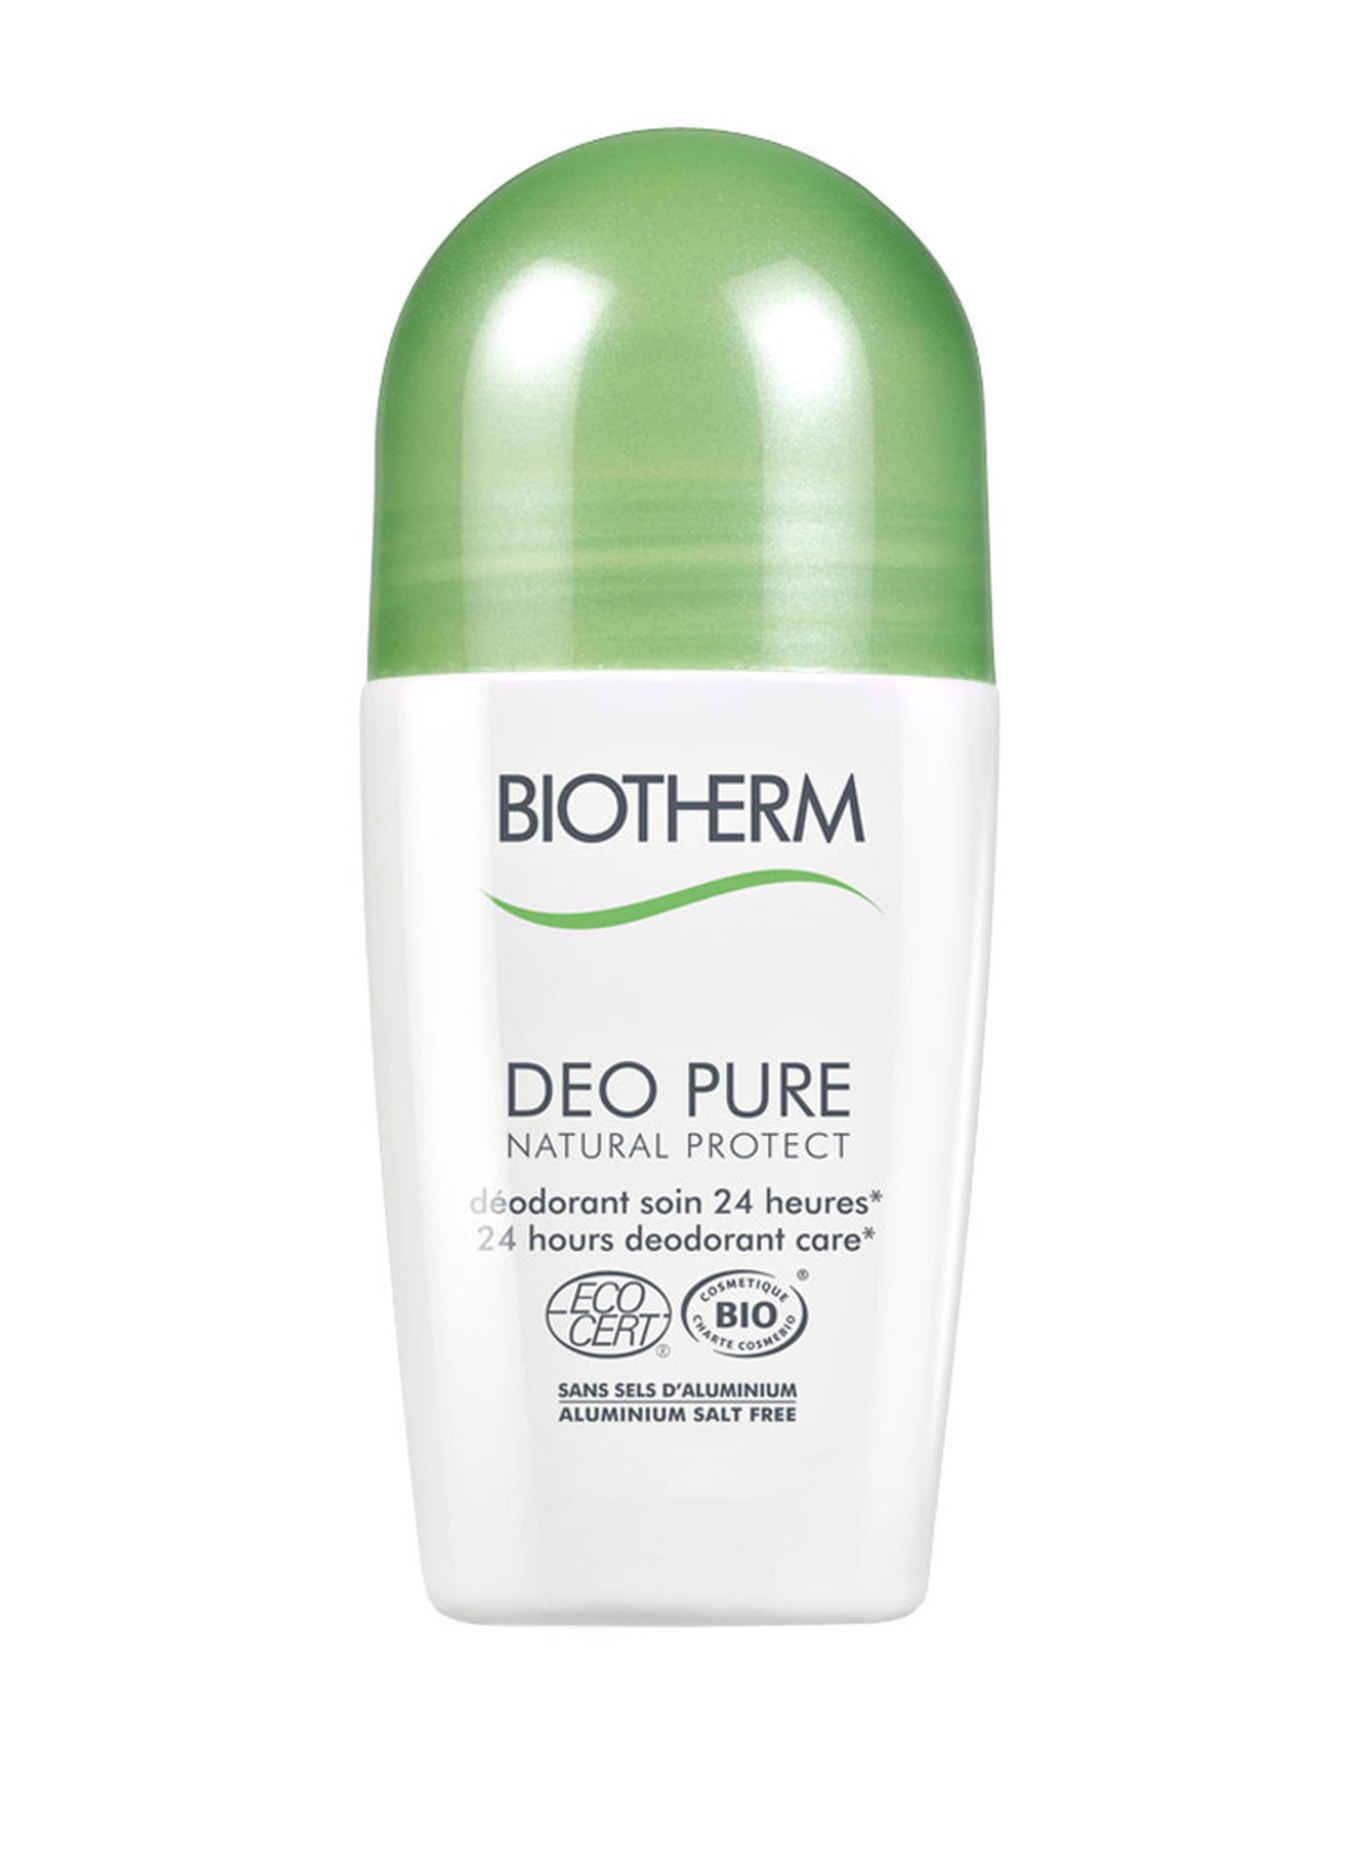 BIOTHERM DEO PURE NATURAL PROTECT (Obrazek 1)